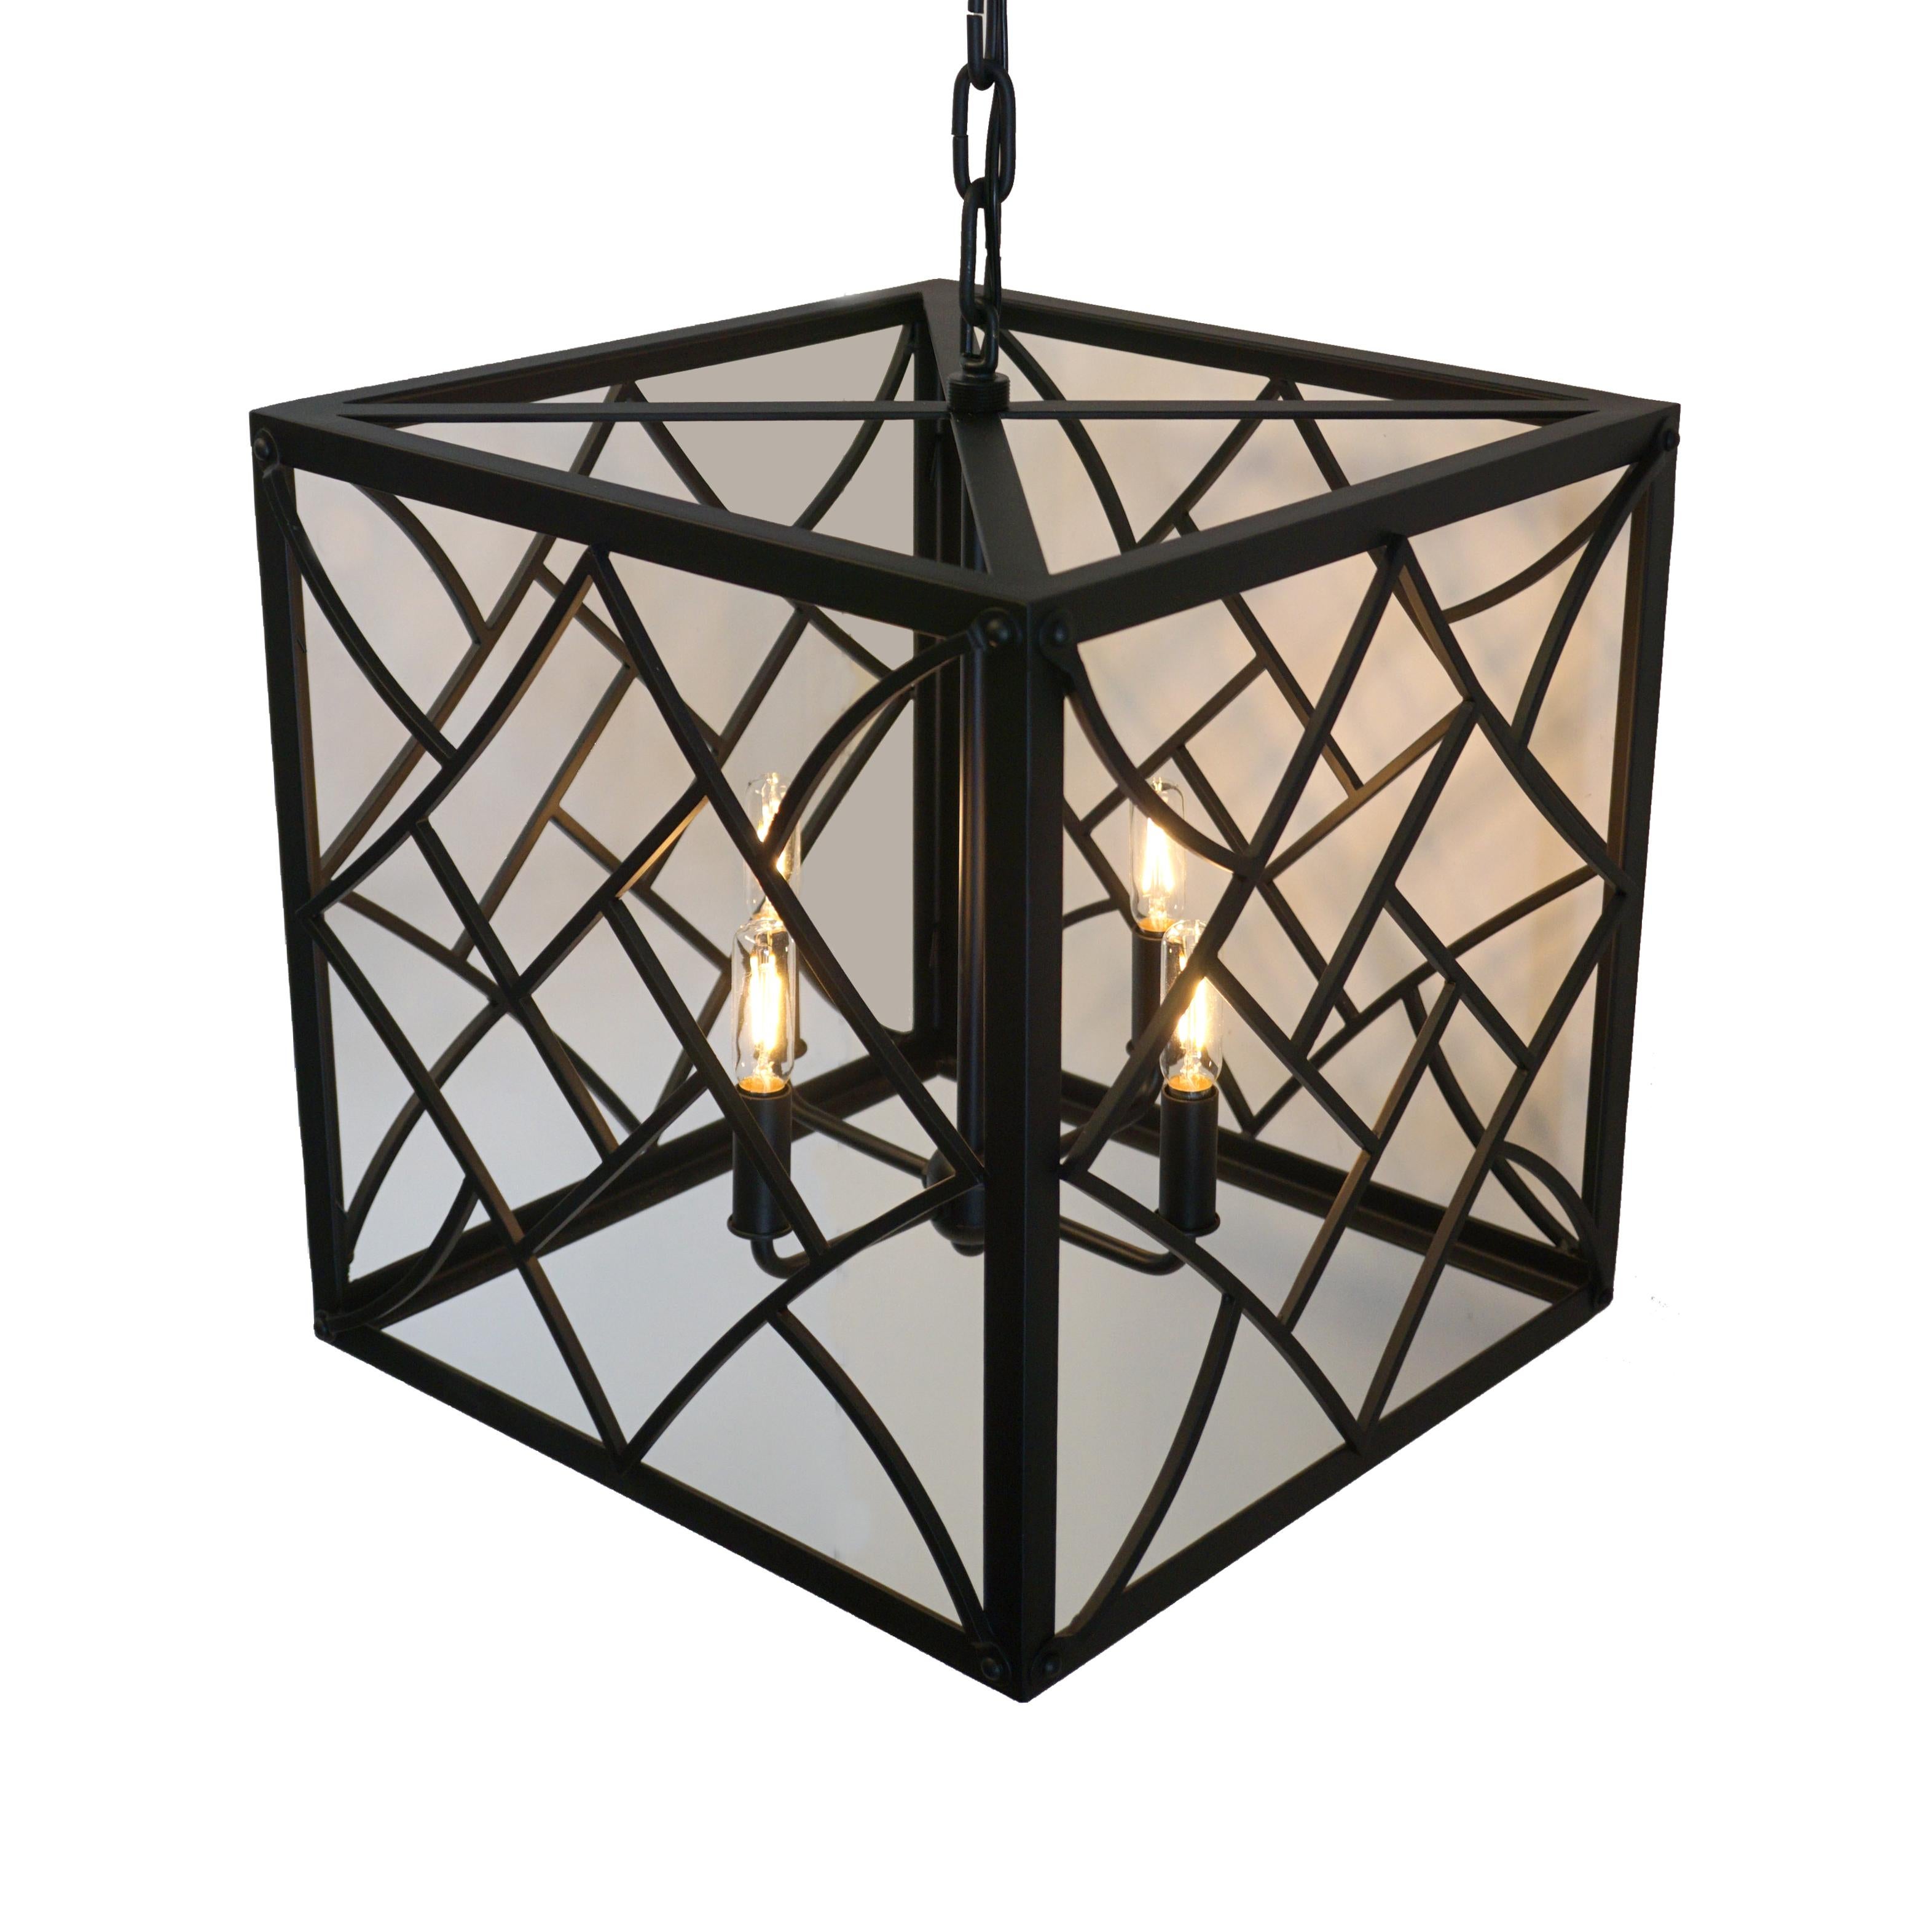 Evoking the Art Deco style of the 1920s and 1930s, our Nouveau cube pendant features bold geometric shapes and a chevron motif. 

Lantern shown in SBLC Black finish.
The Black finish and no glass create a contemporary look.

Handcrafted in wrought